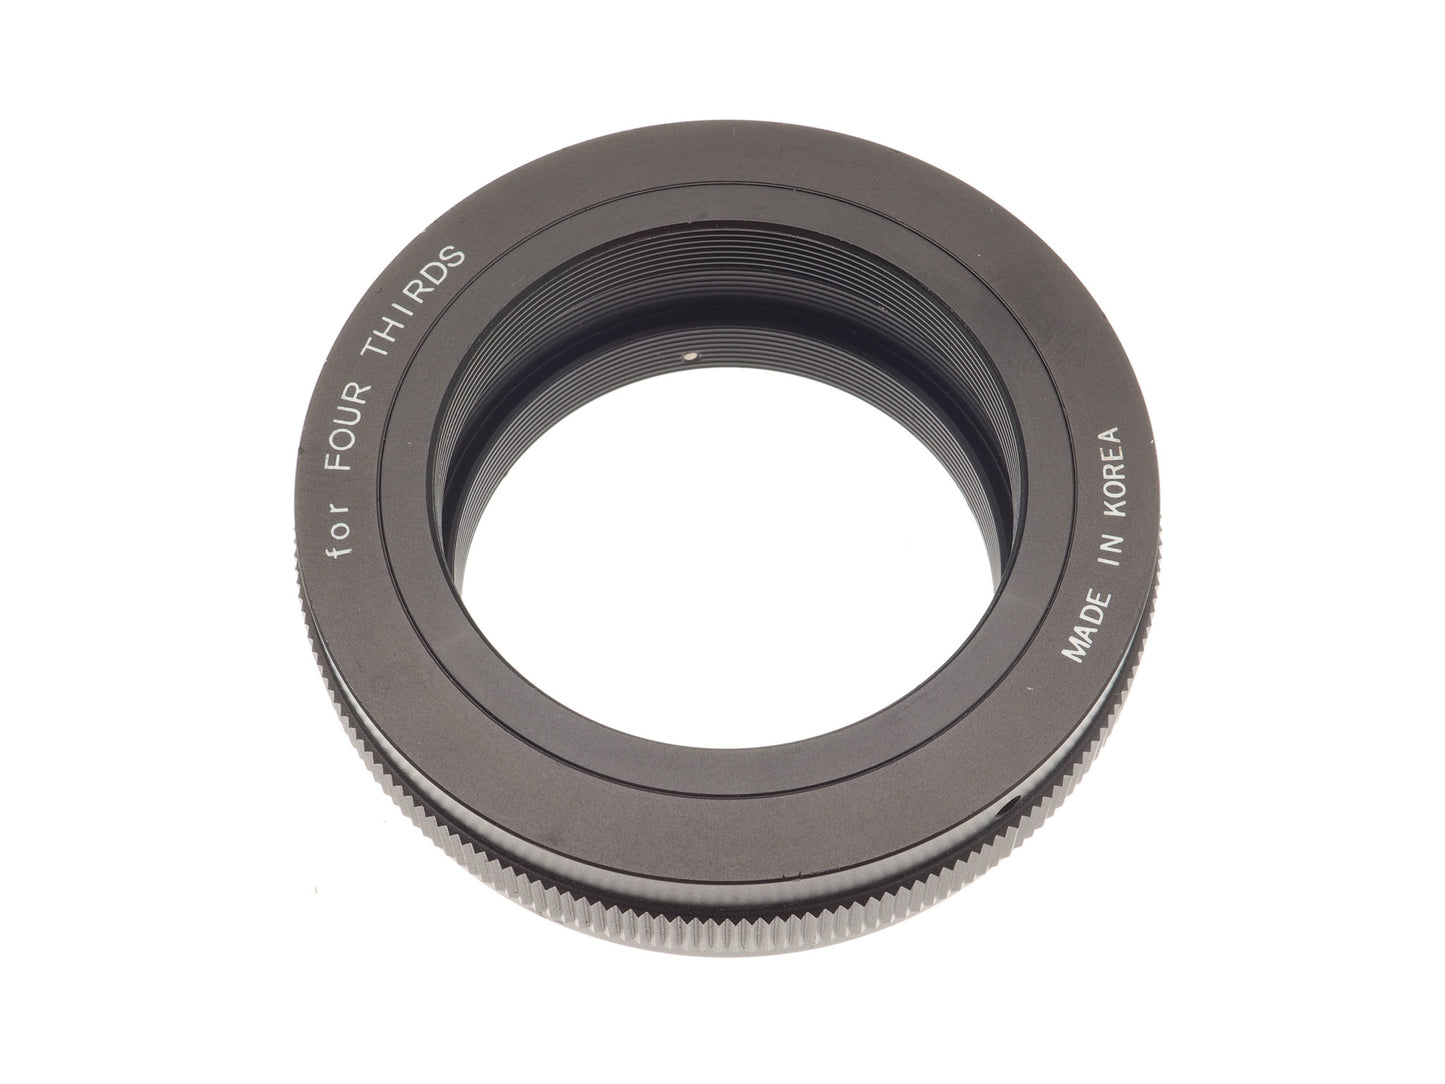 Generic T2 - Four Thirds Adapter - Lens Adapter